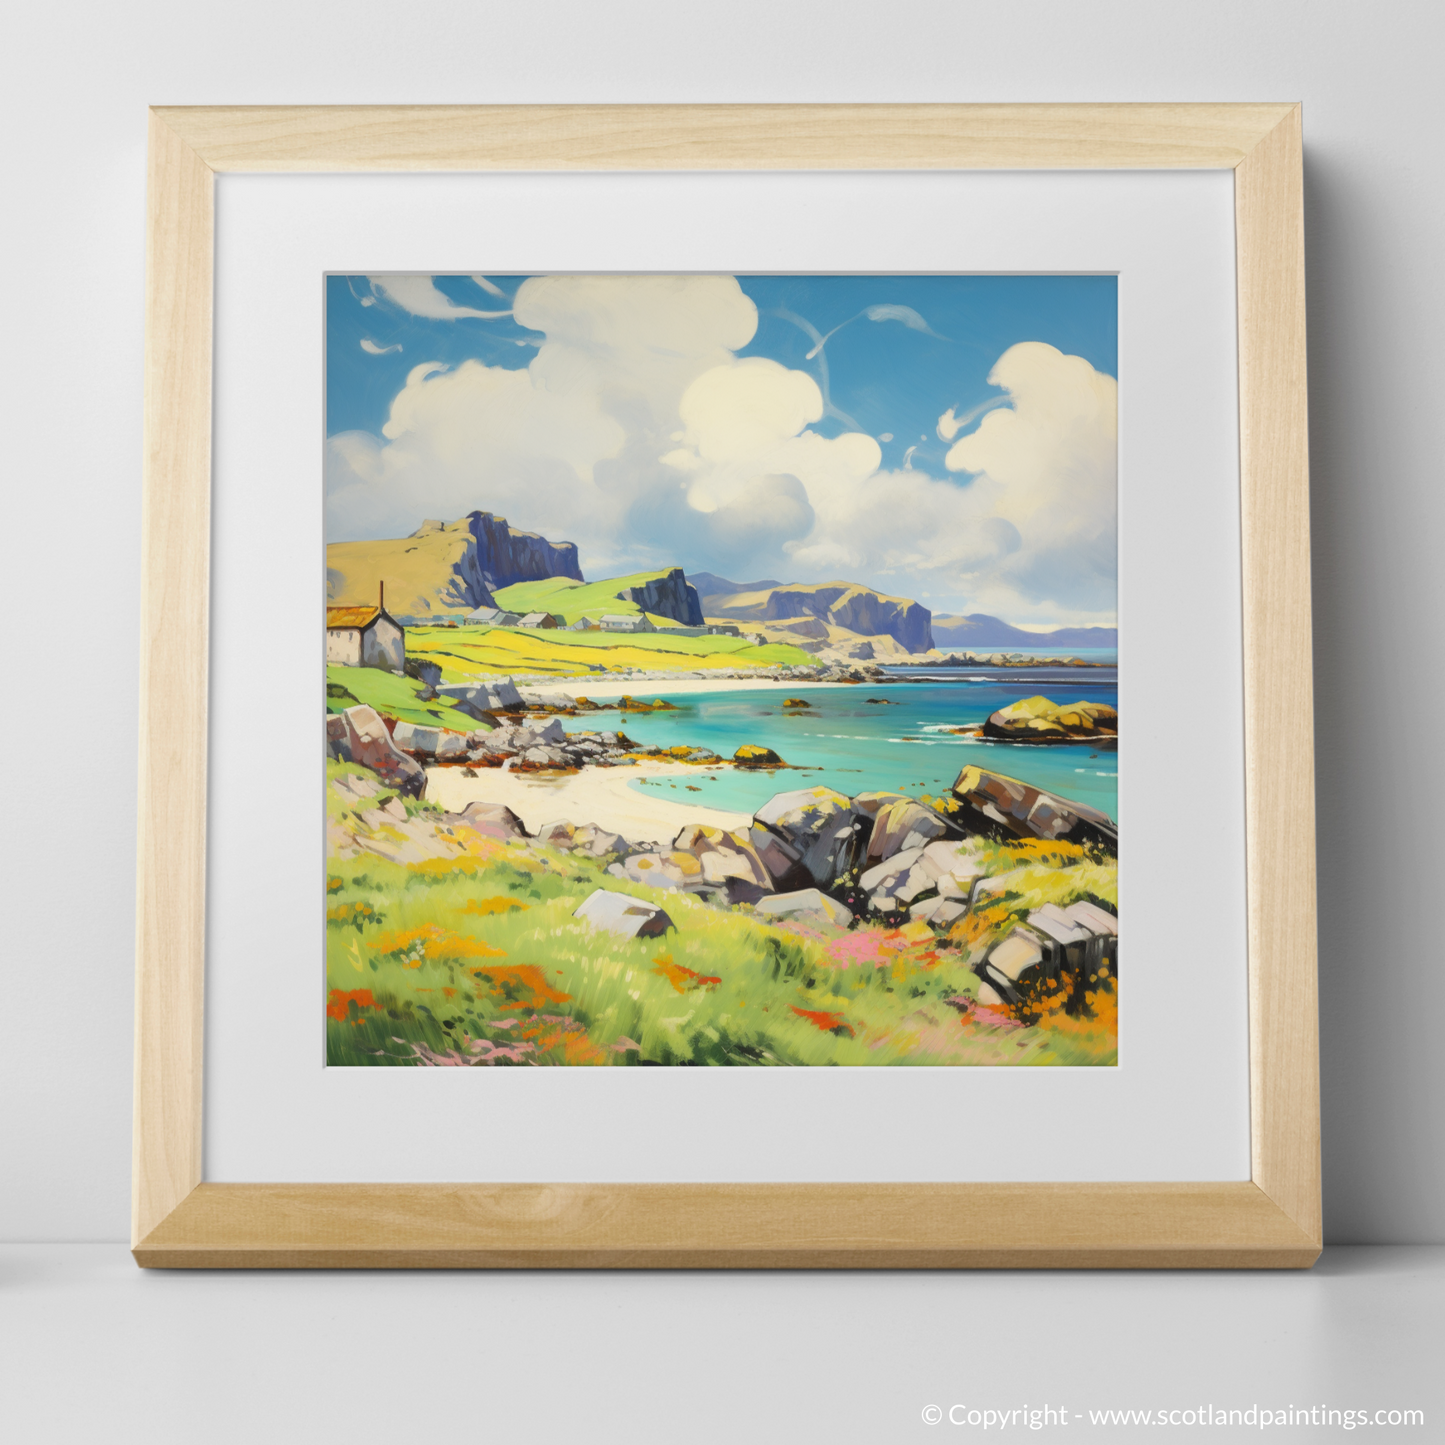 Art Print of Isle of Mull, Inner Hebrides in summer with a natural frame